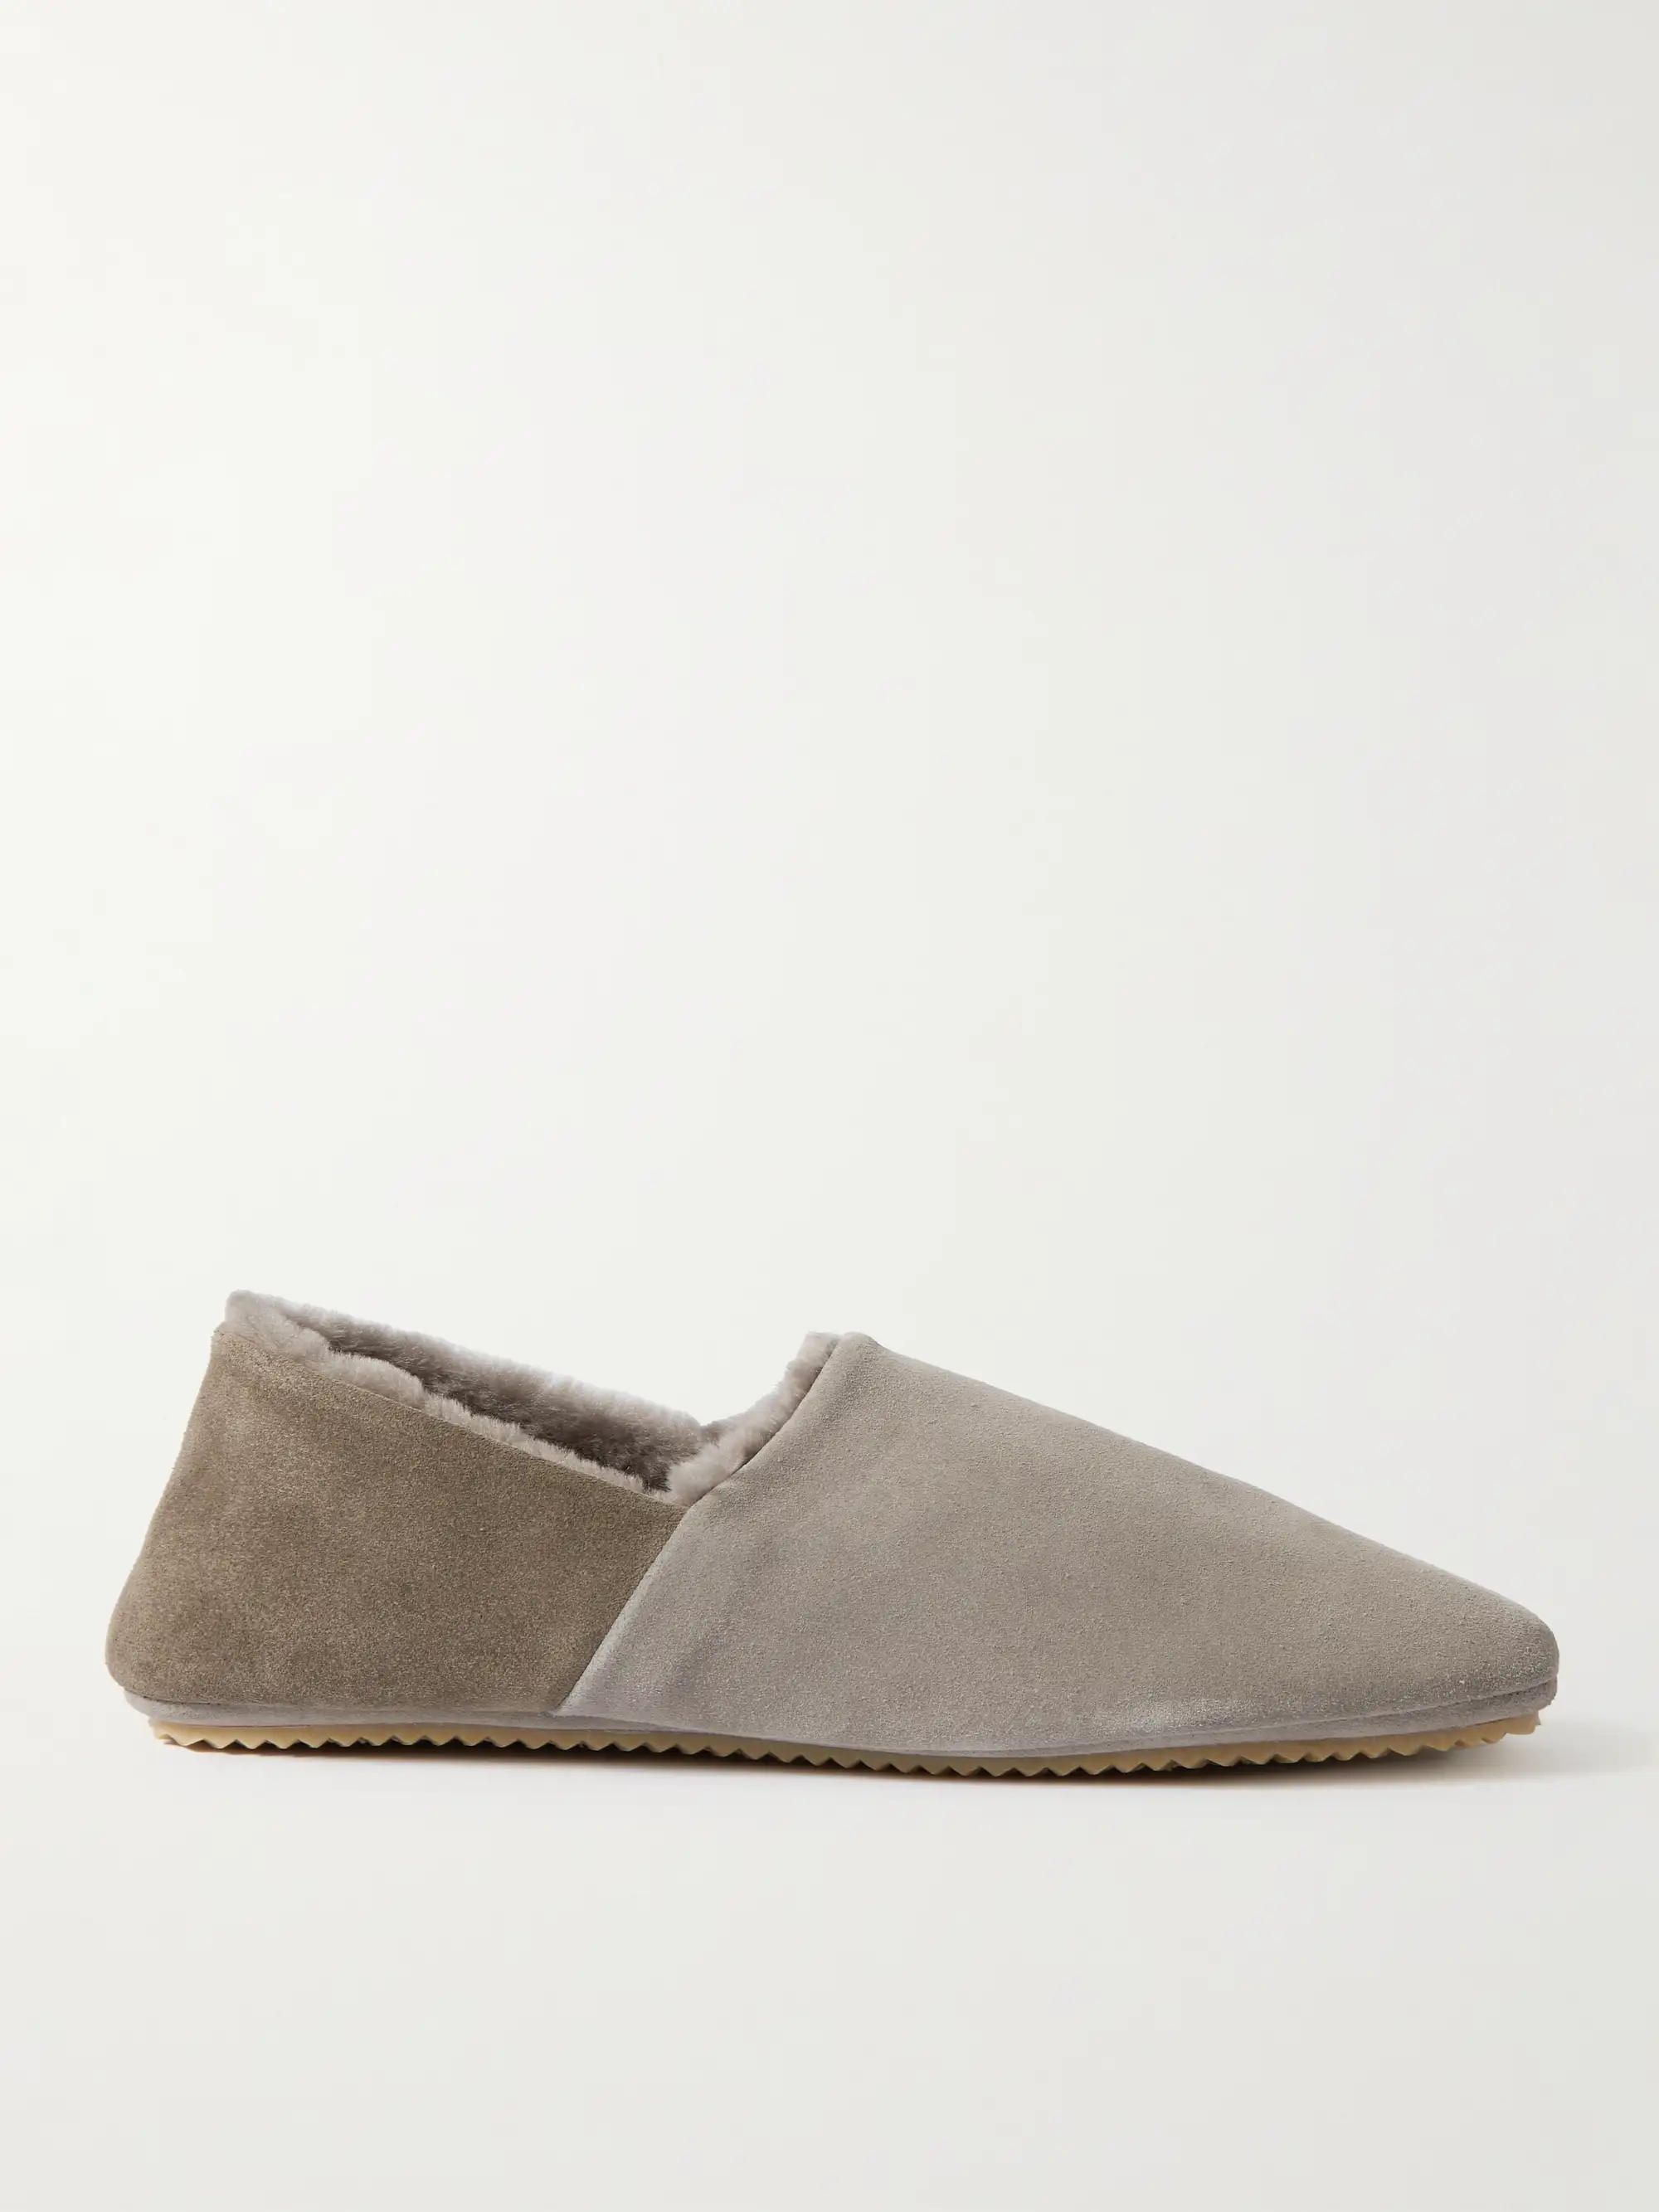 MR P. Babouche Shearling-Lined Suede Slippers 1647597310185854